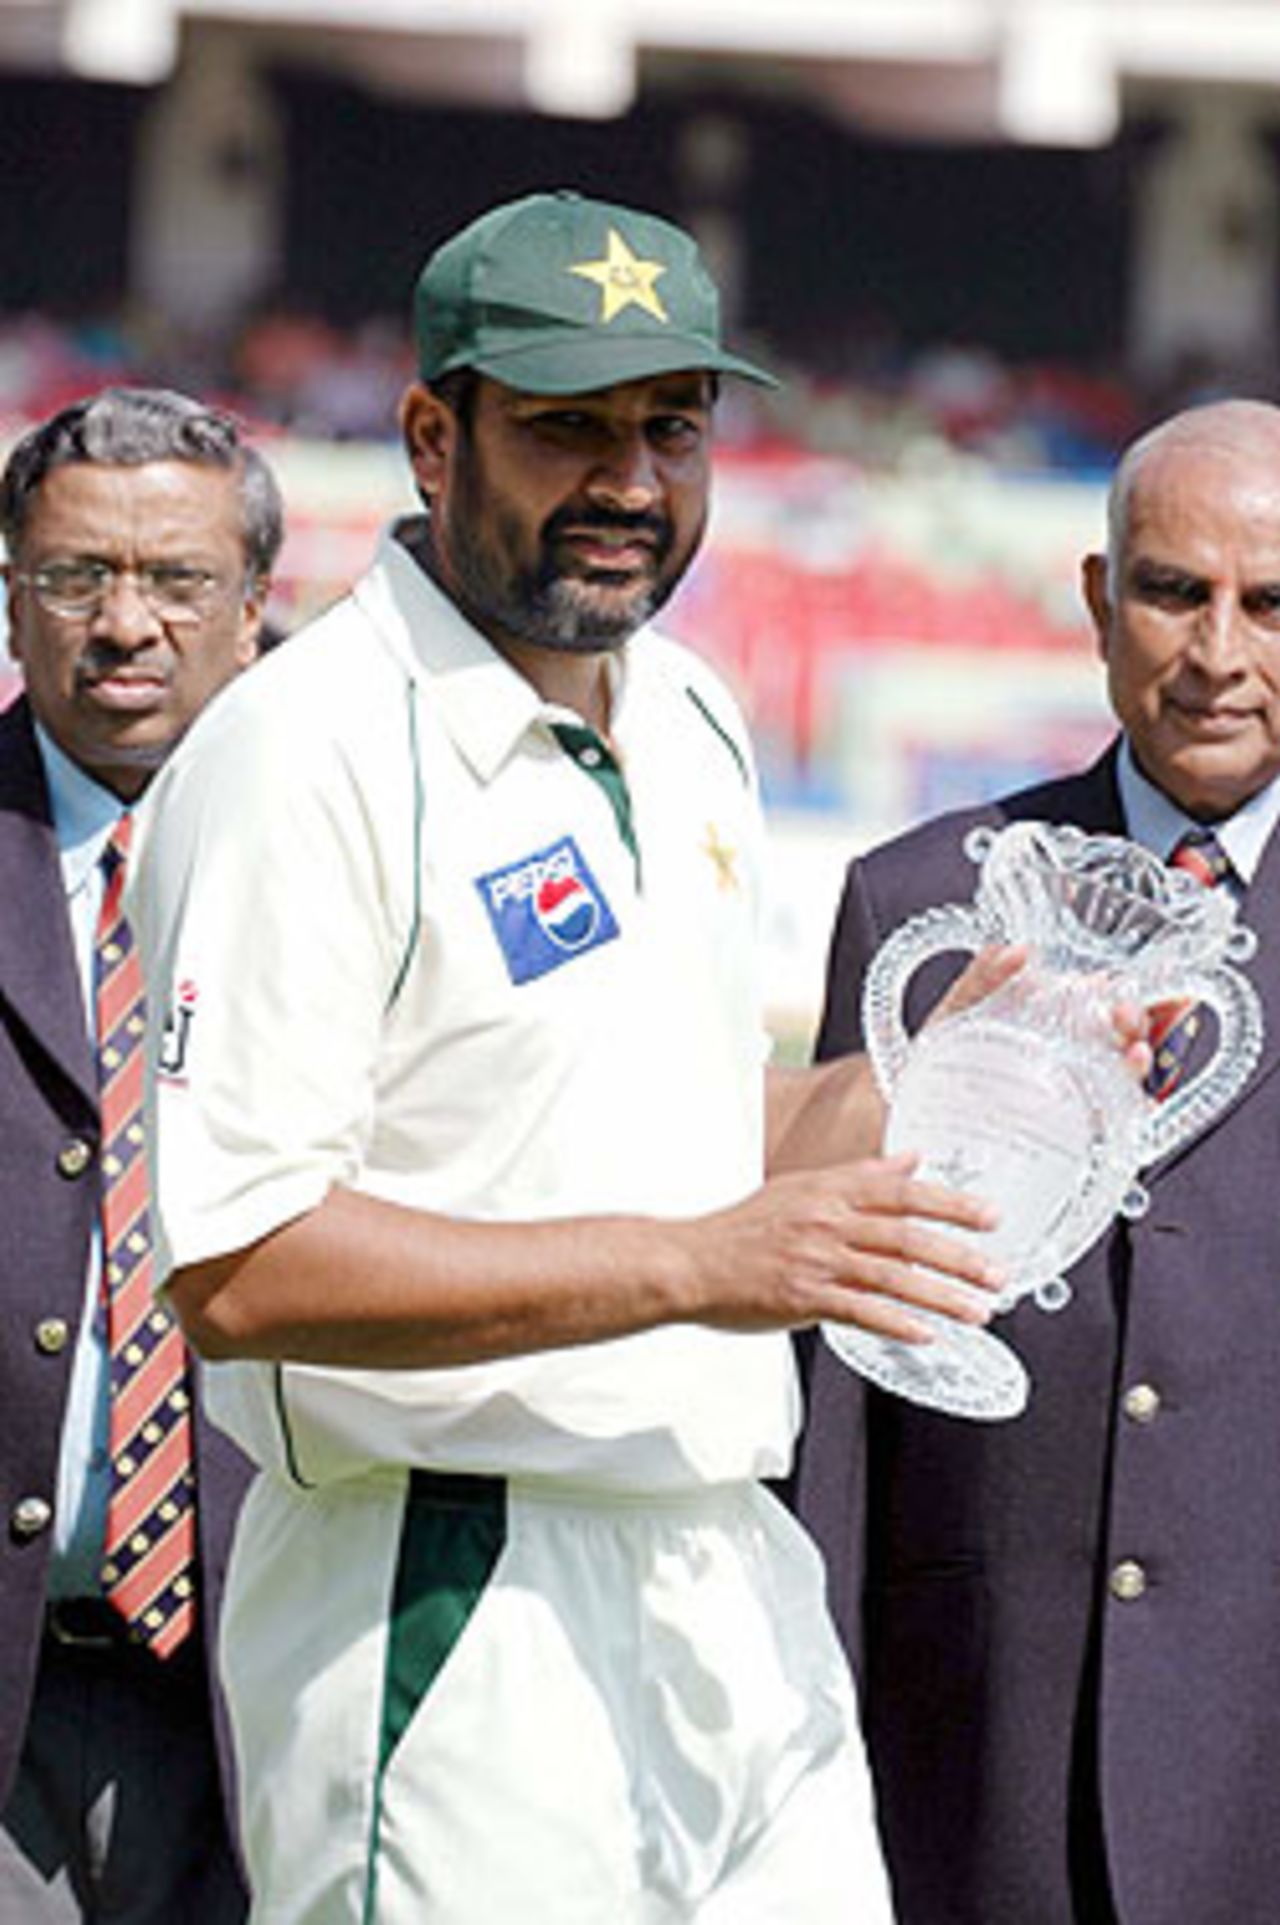 For Pakistan captain Inzamam-ul-Haq, the Bangalore test will be a memorable one for reasons more than one. This was his hundredth test match - he was felicitated by the KSCA for appearing in his 100th test match, he became only the fifth cricketer in test history to score a century in his hundredth test, and finally, to round it up, his team won the test match to level the series 1-1., India v Pakistan, 3rd Test, Bangalore, 24-28 Mar 2005